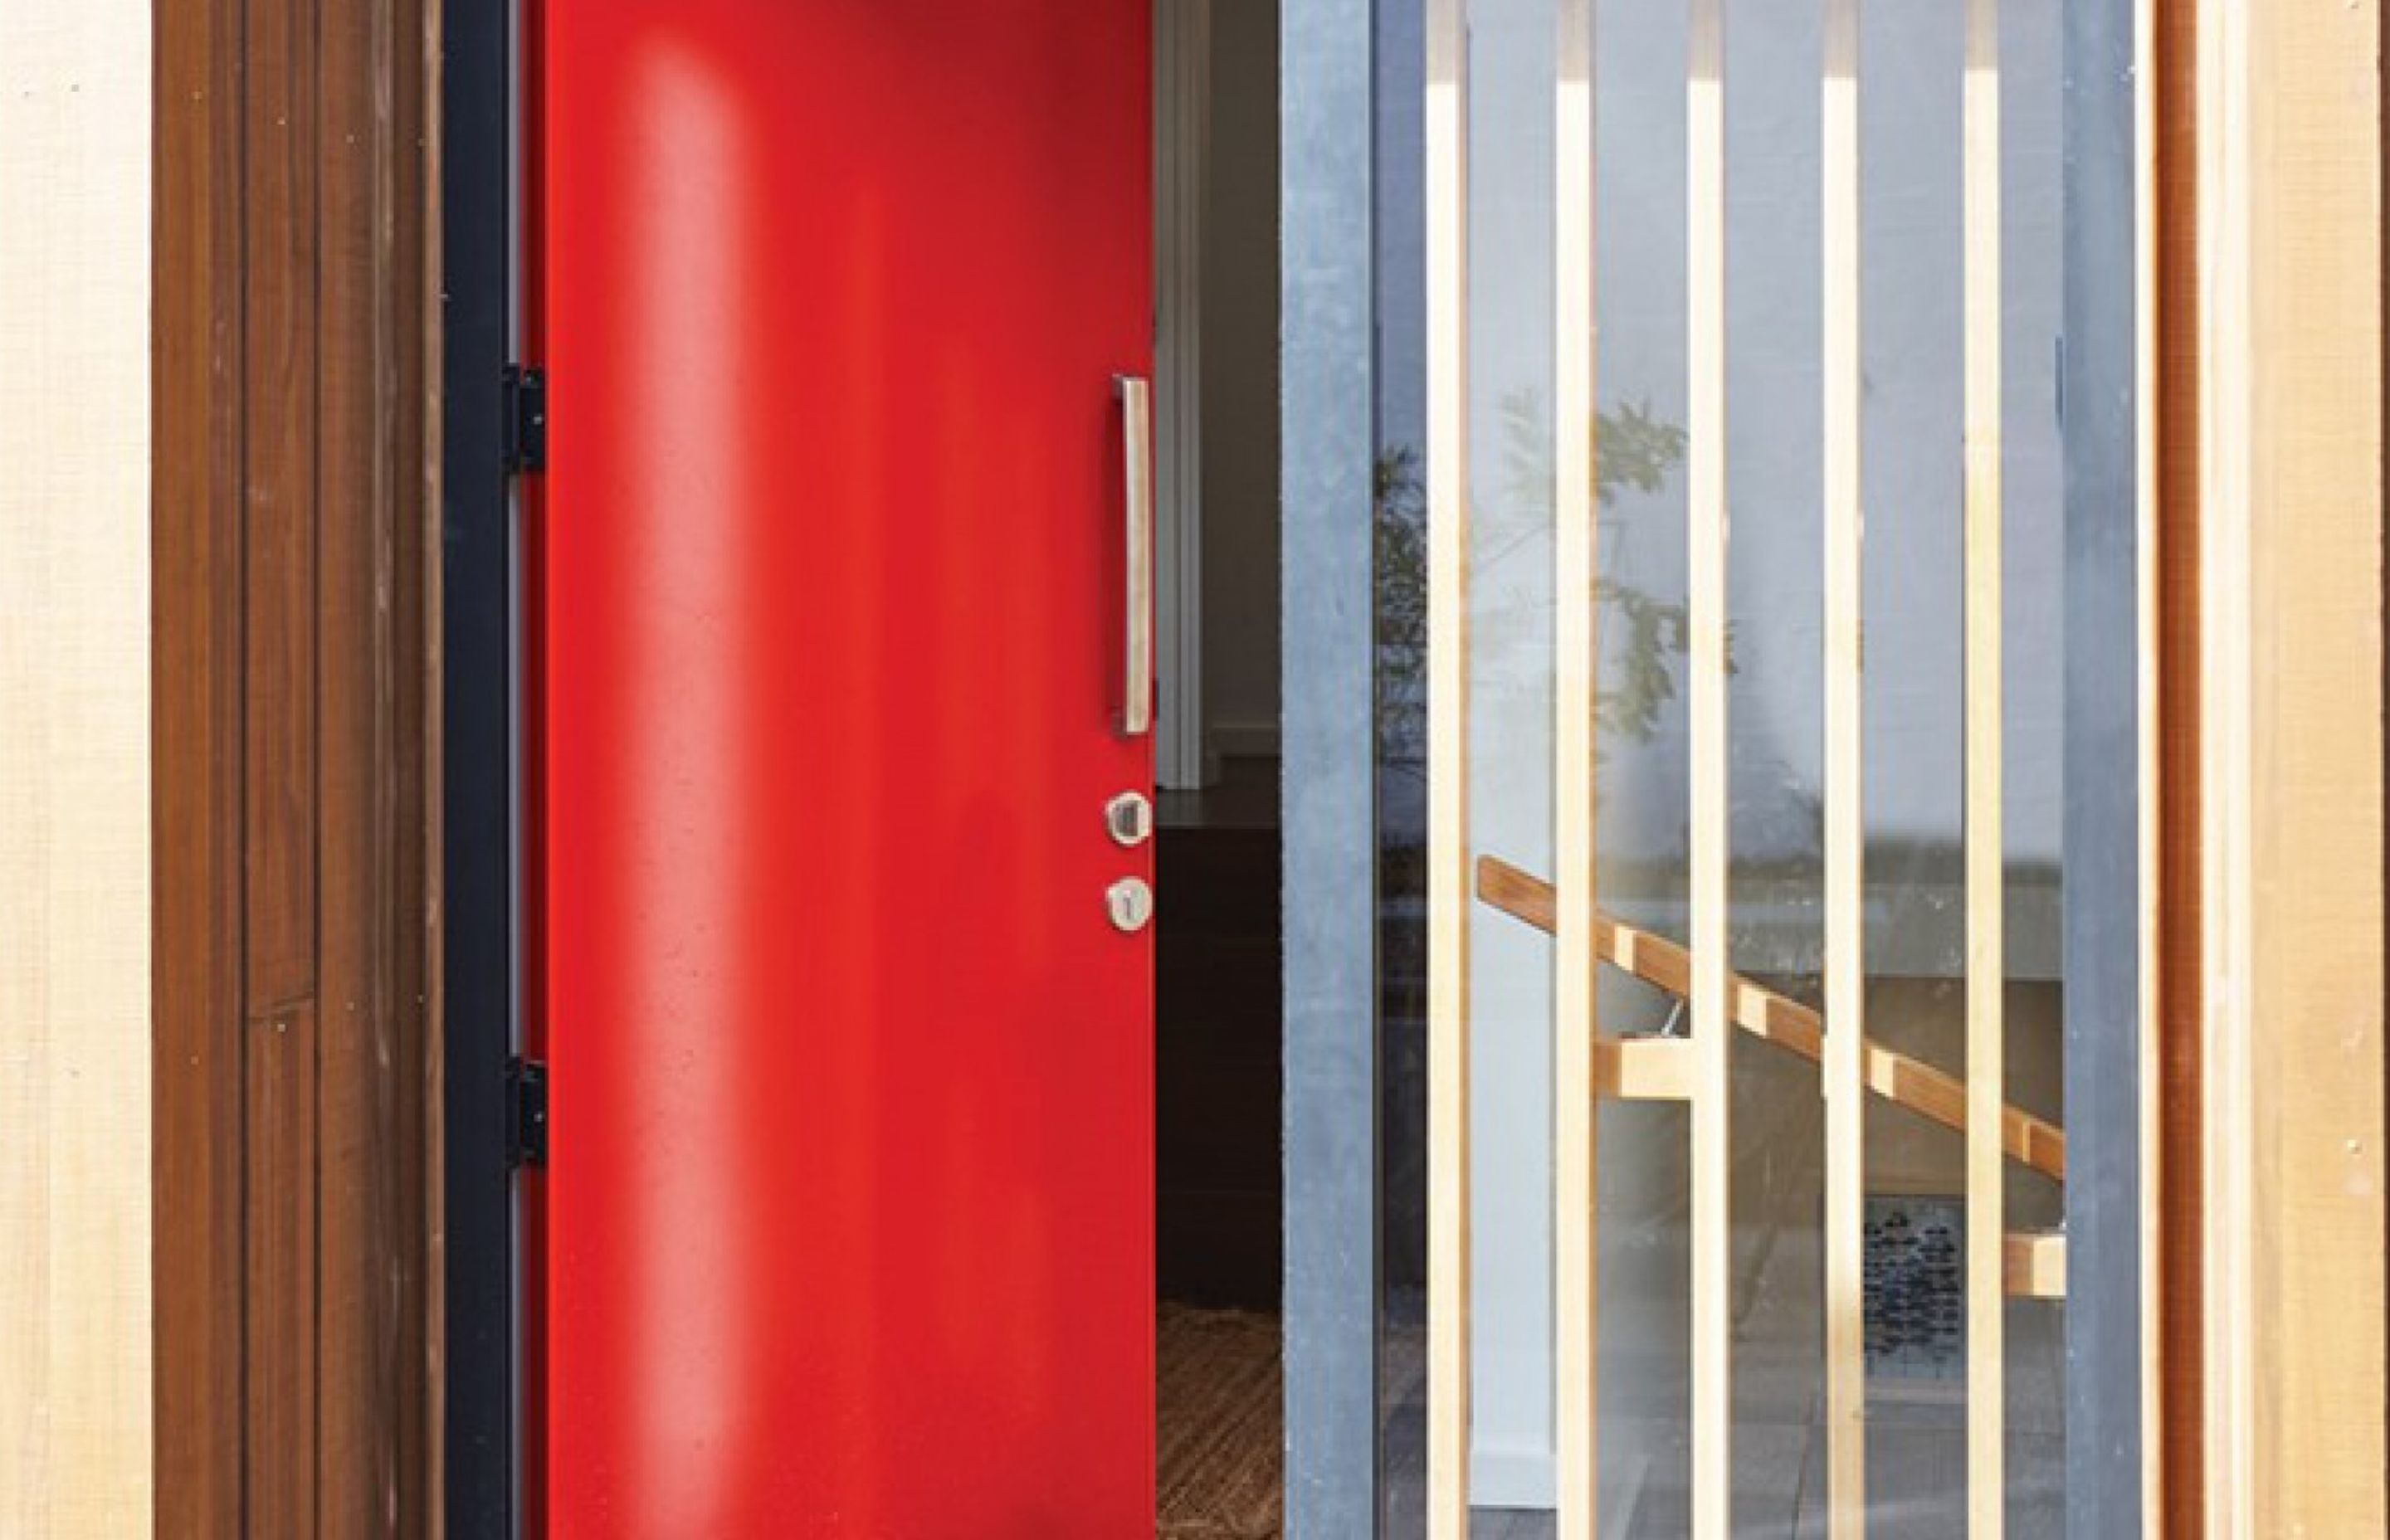 How to choose an aluminium entrance door for your home build